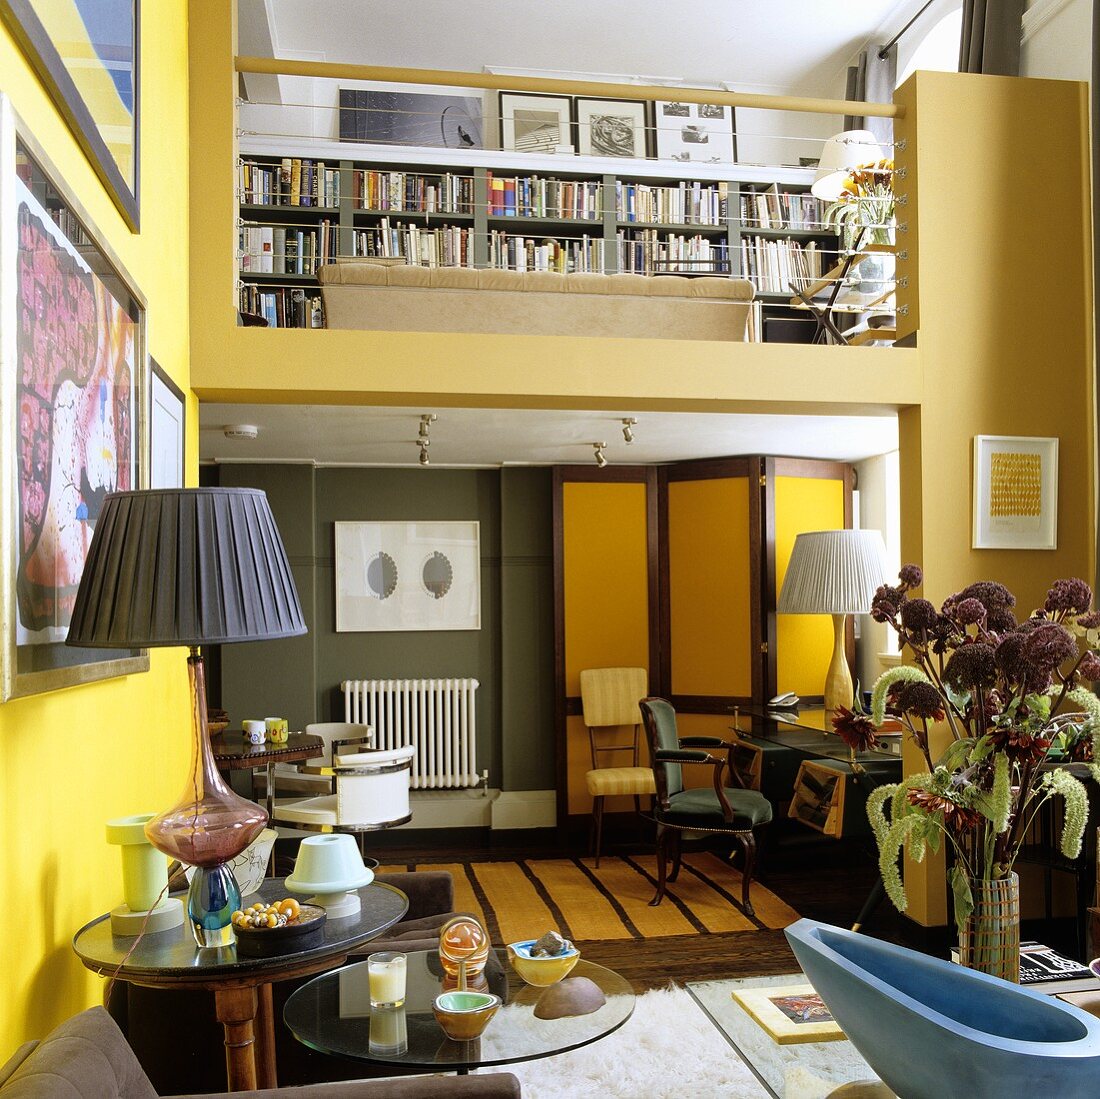 A maisonette apartment - living room with yellow walls and a view onto a gallery with a bookshelf